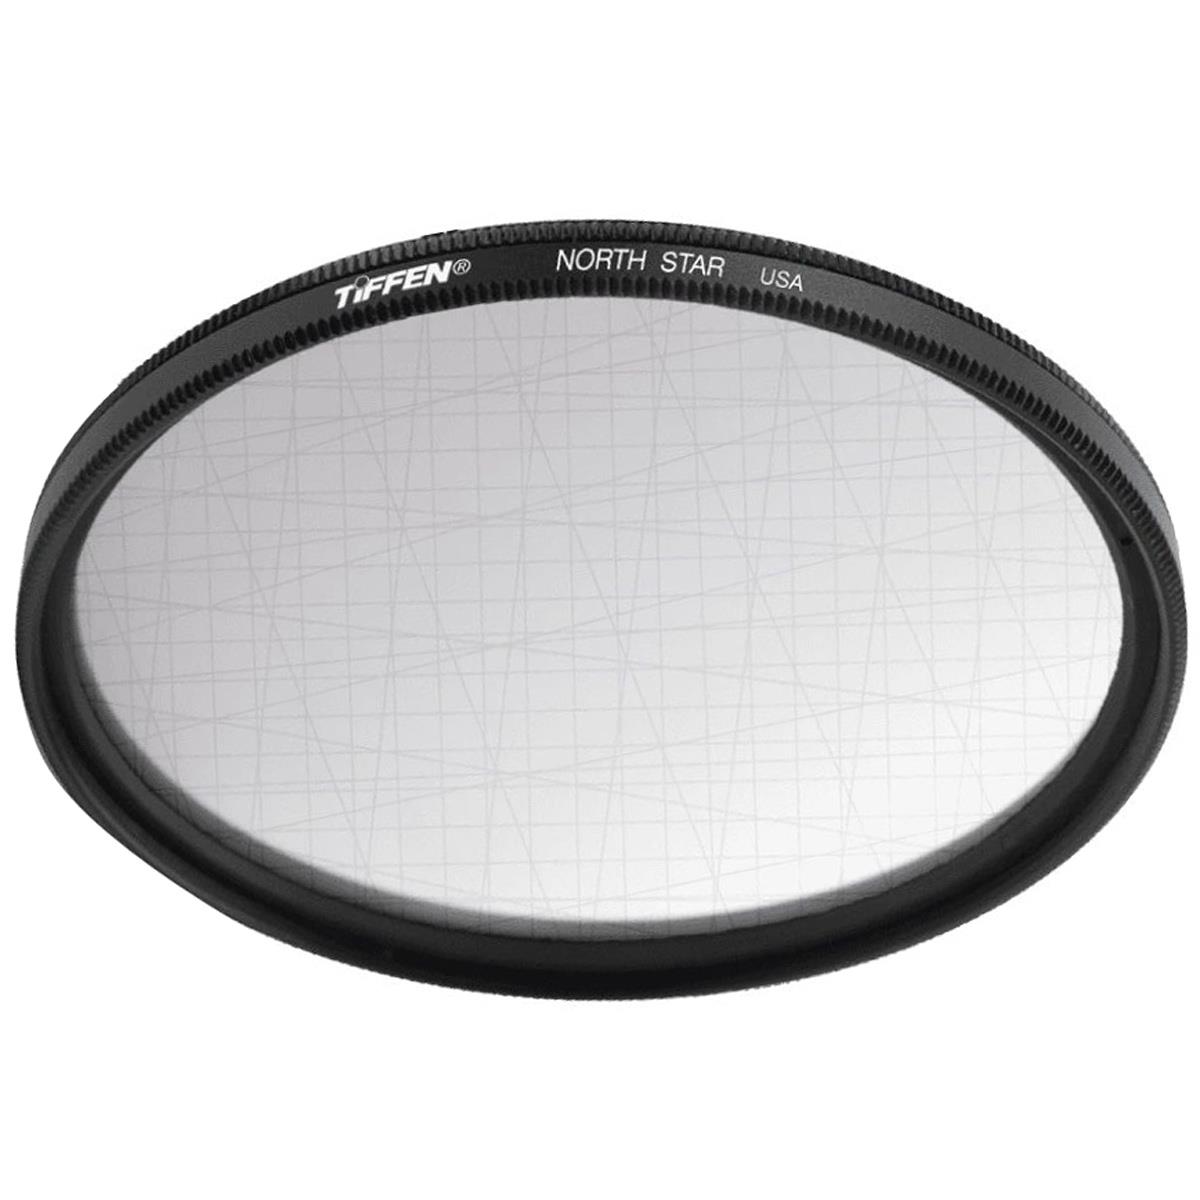 Image of Tiffen 77mm North Star/FX Special Star Effect Filter